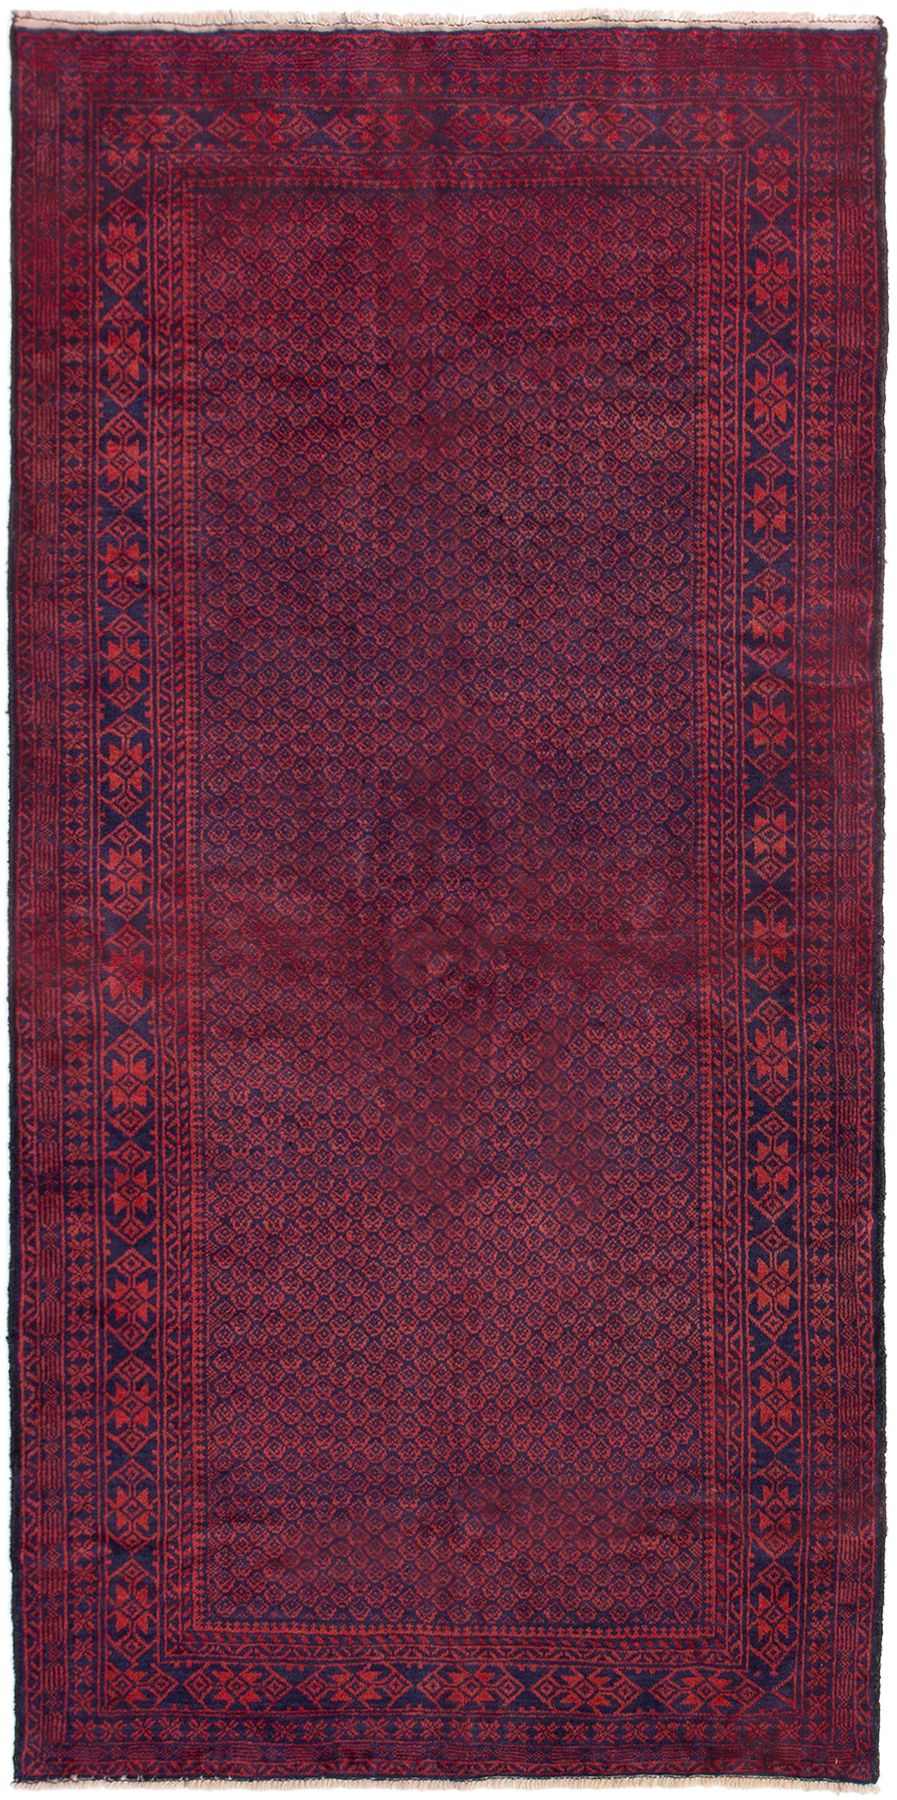 Hand-knotted Teimani Red Wool Rug 3'11" x 7'9" Size: 3'11" x 7'9"  